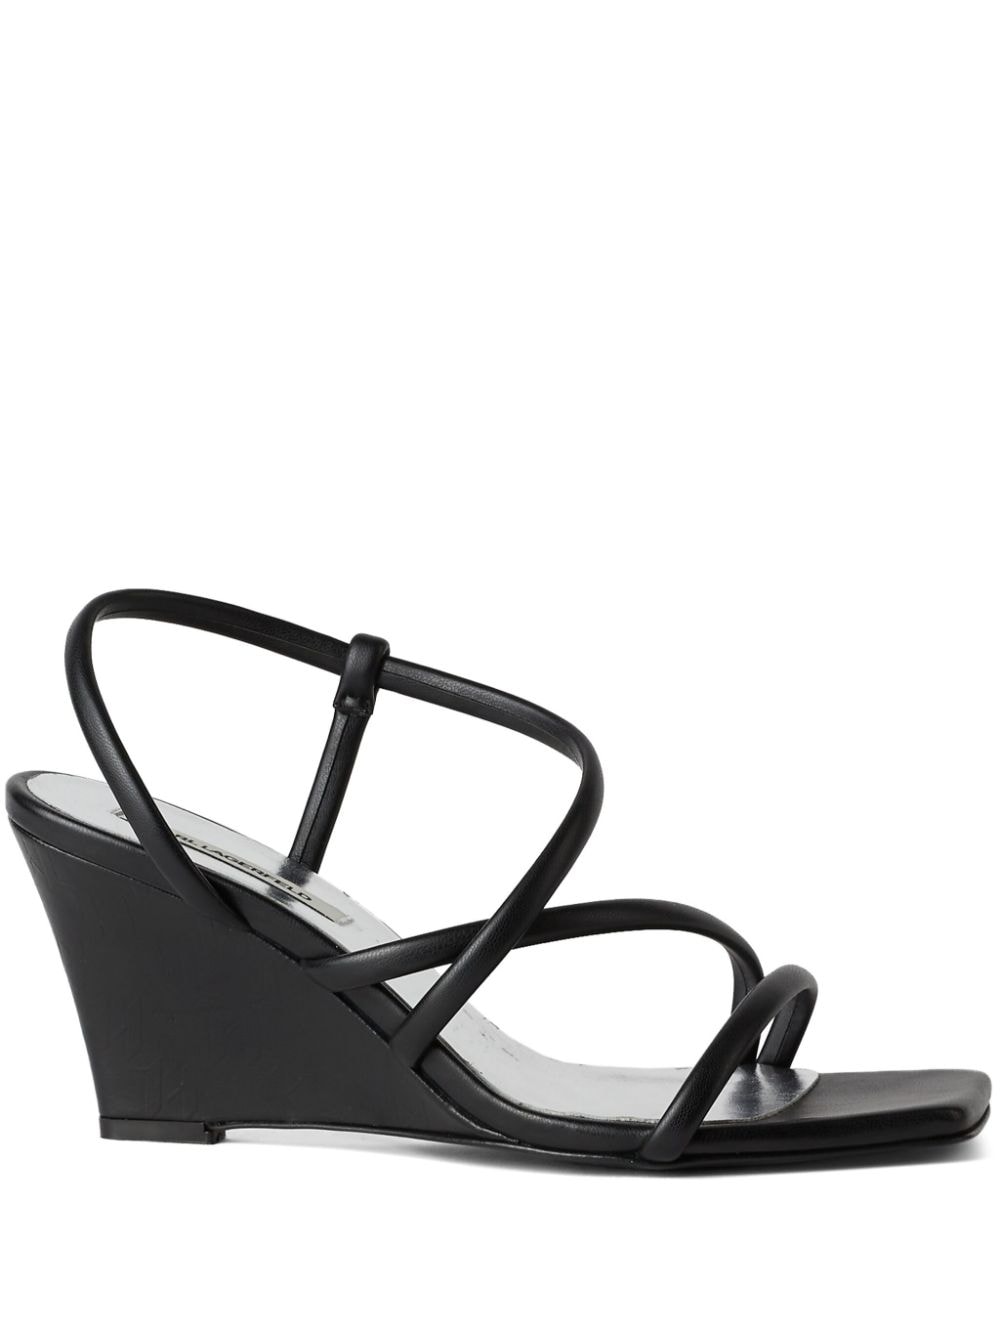 Rialto 80mm leather sandals